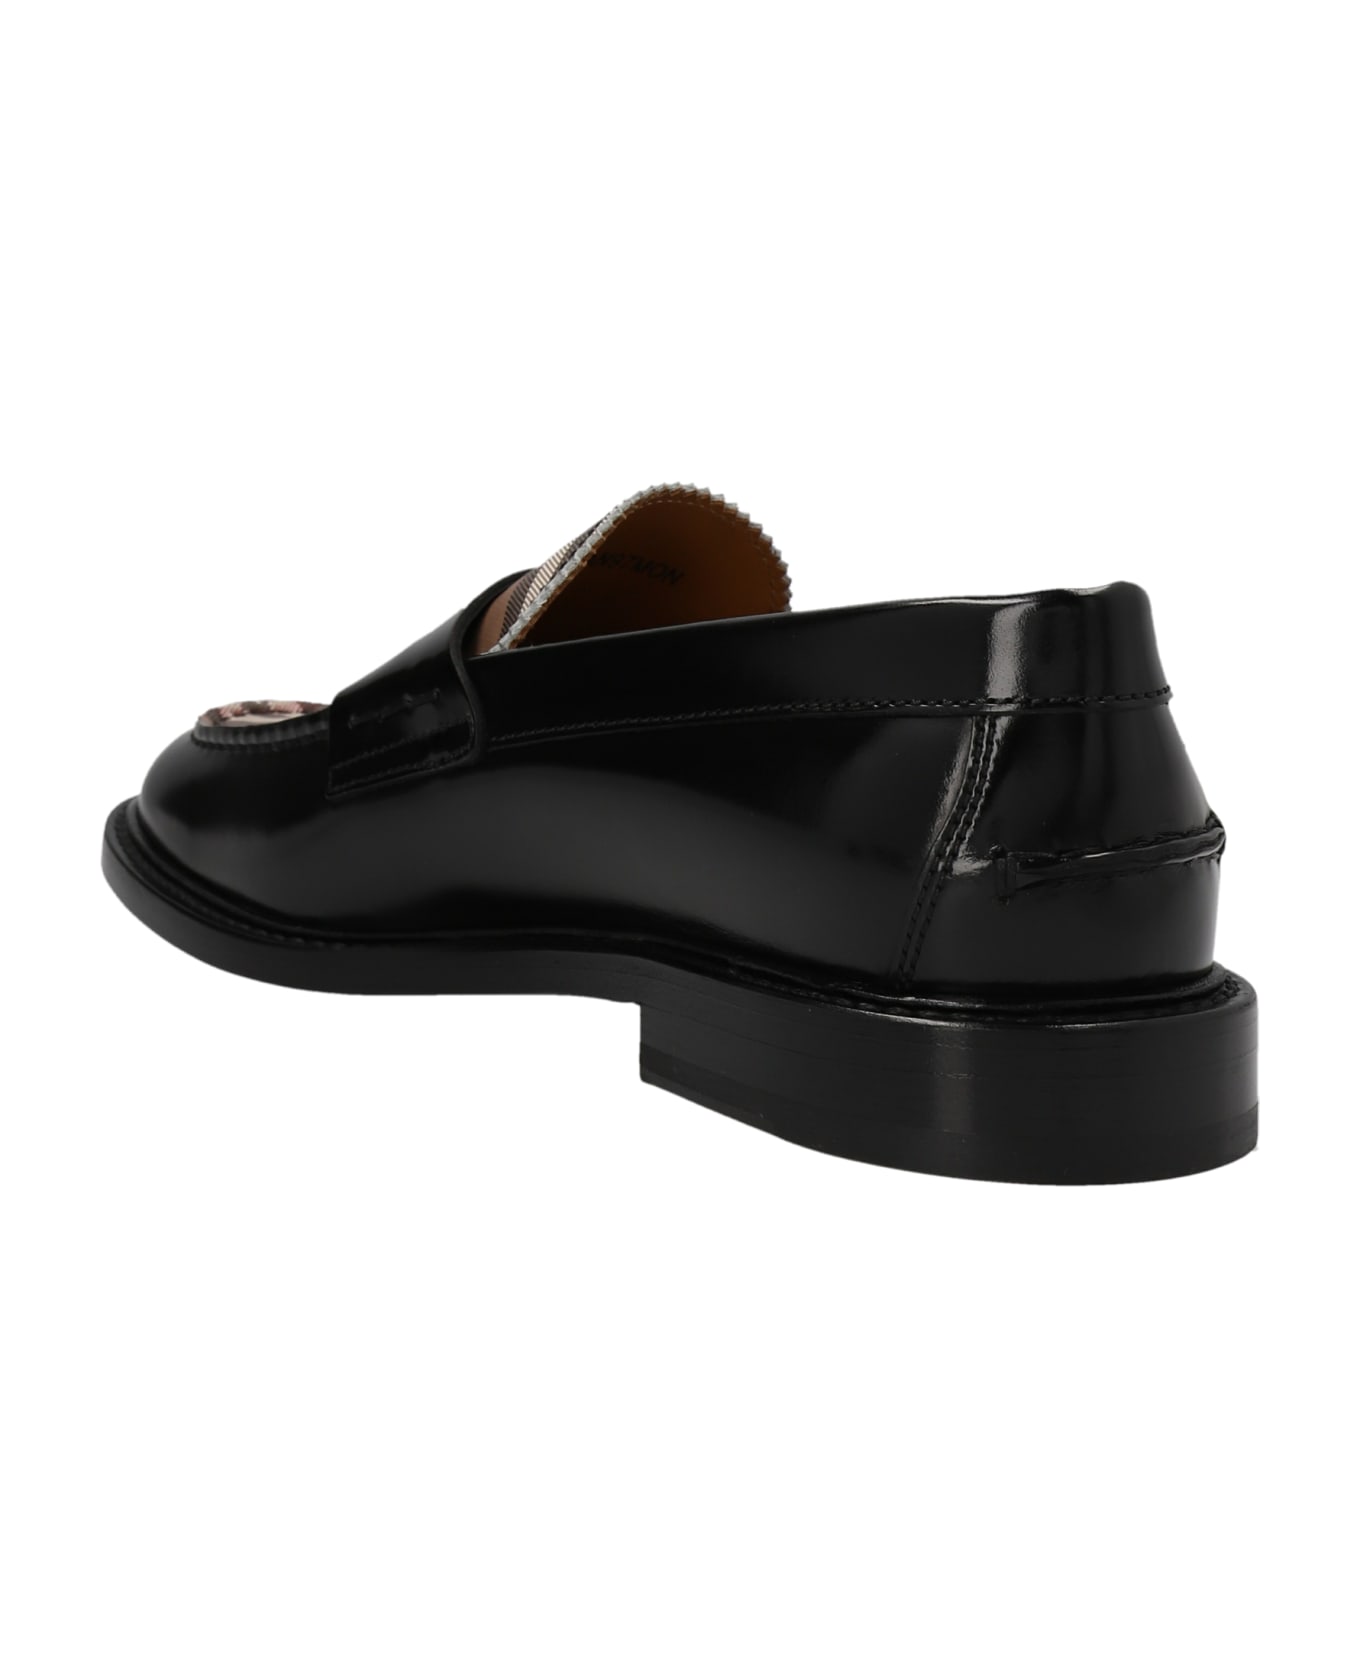 Burberry 'croftwood' Loafers - Black  